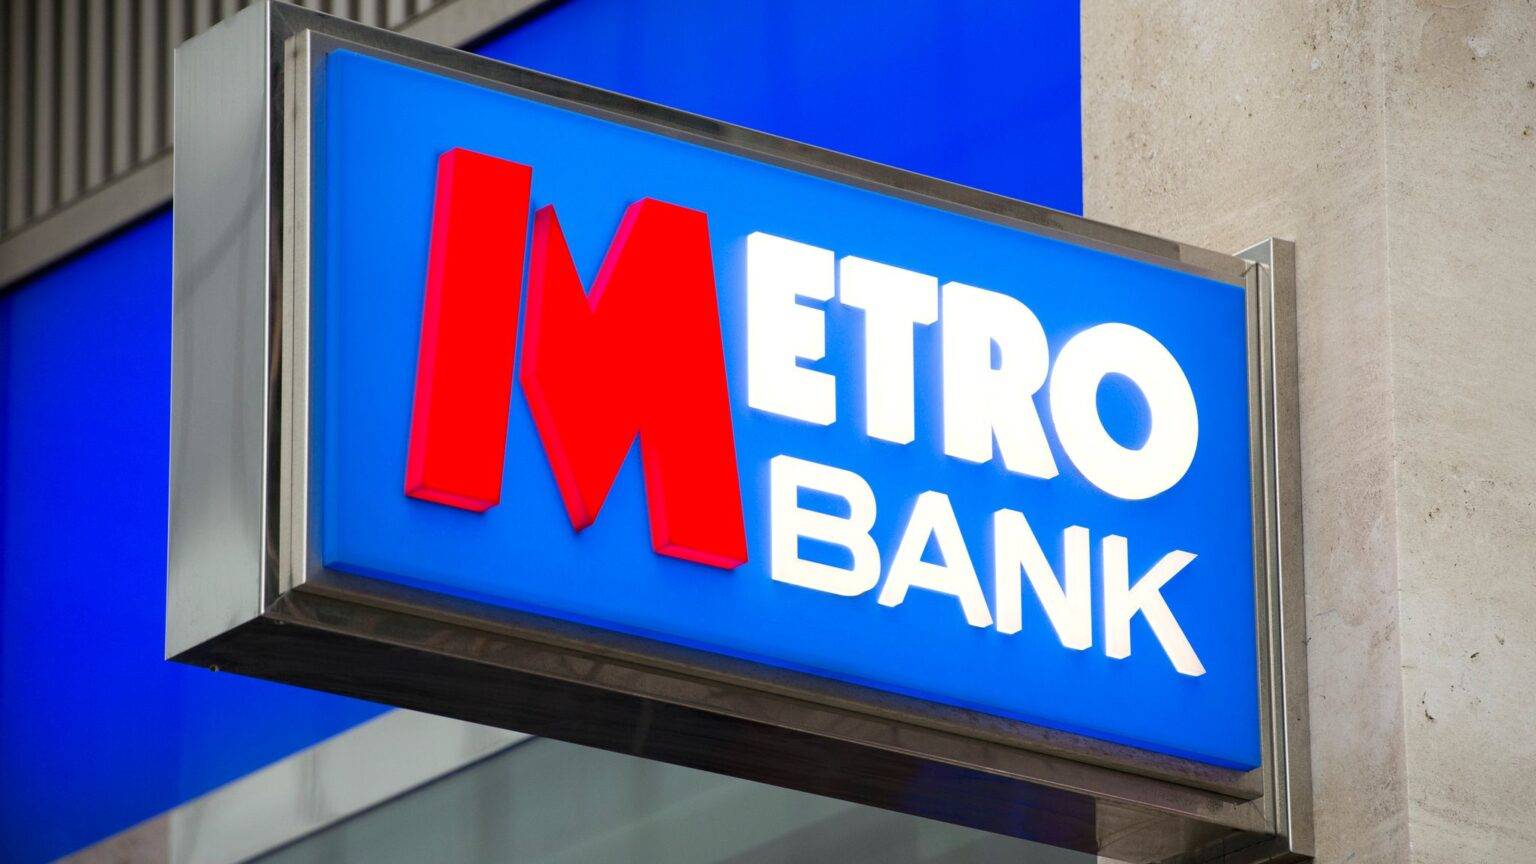 Metro Bank has a limited future, claims co-founder